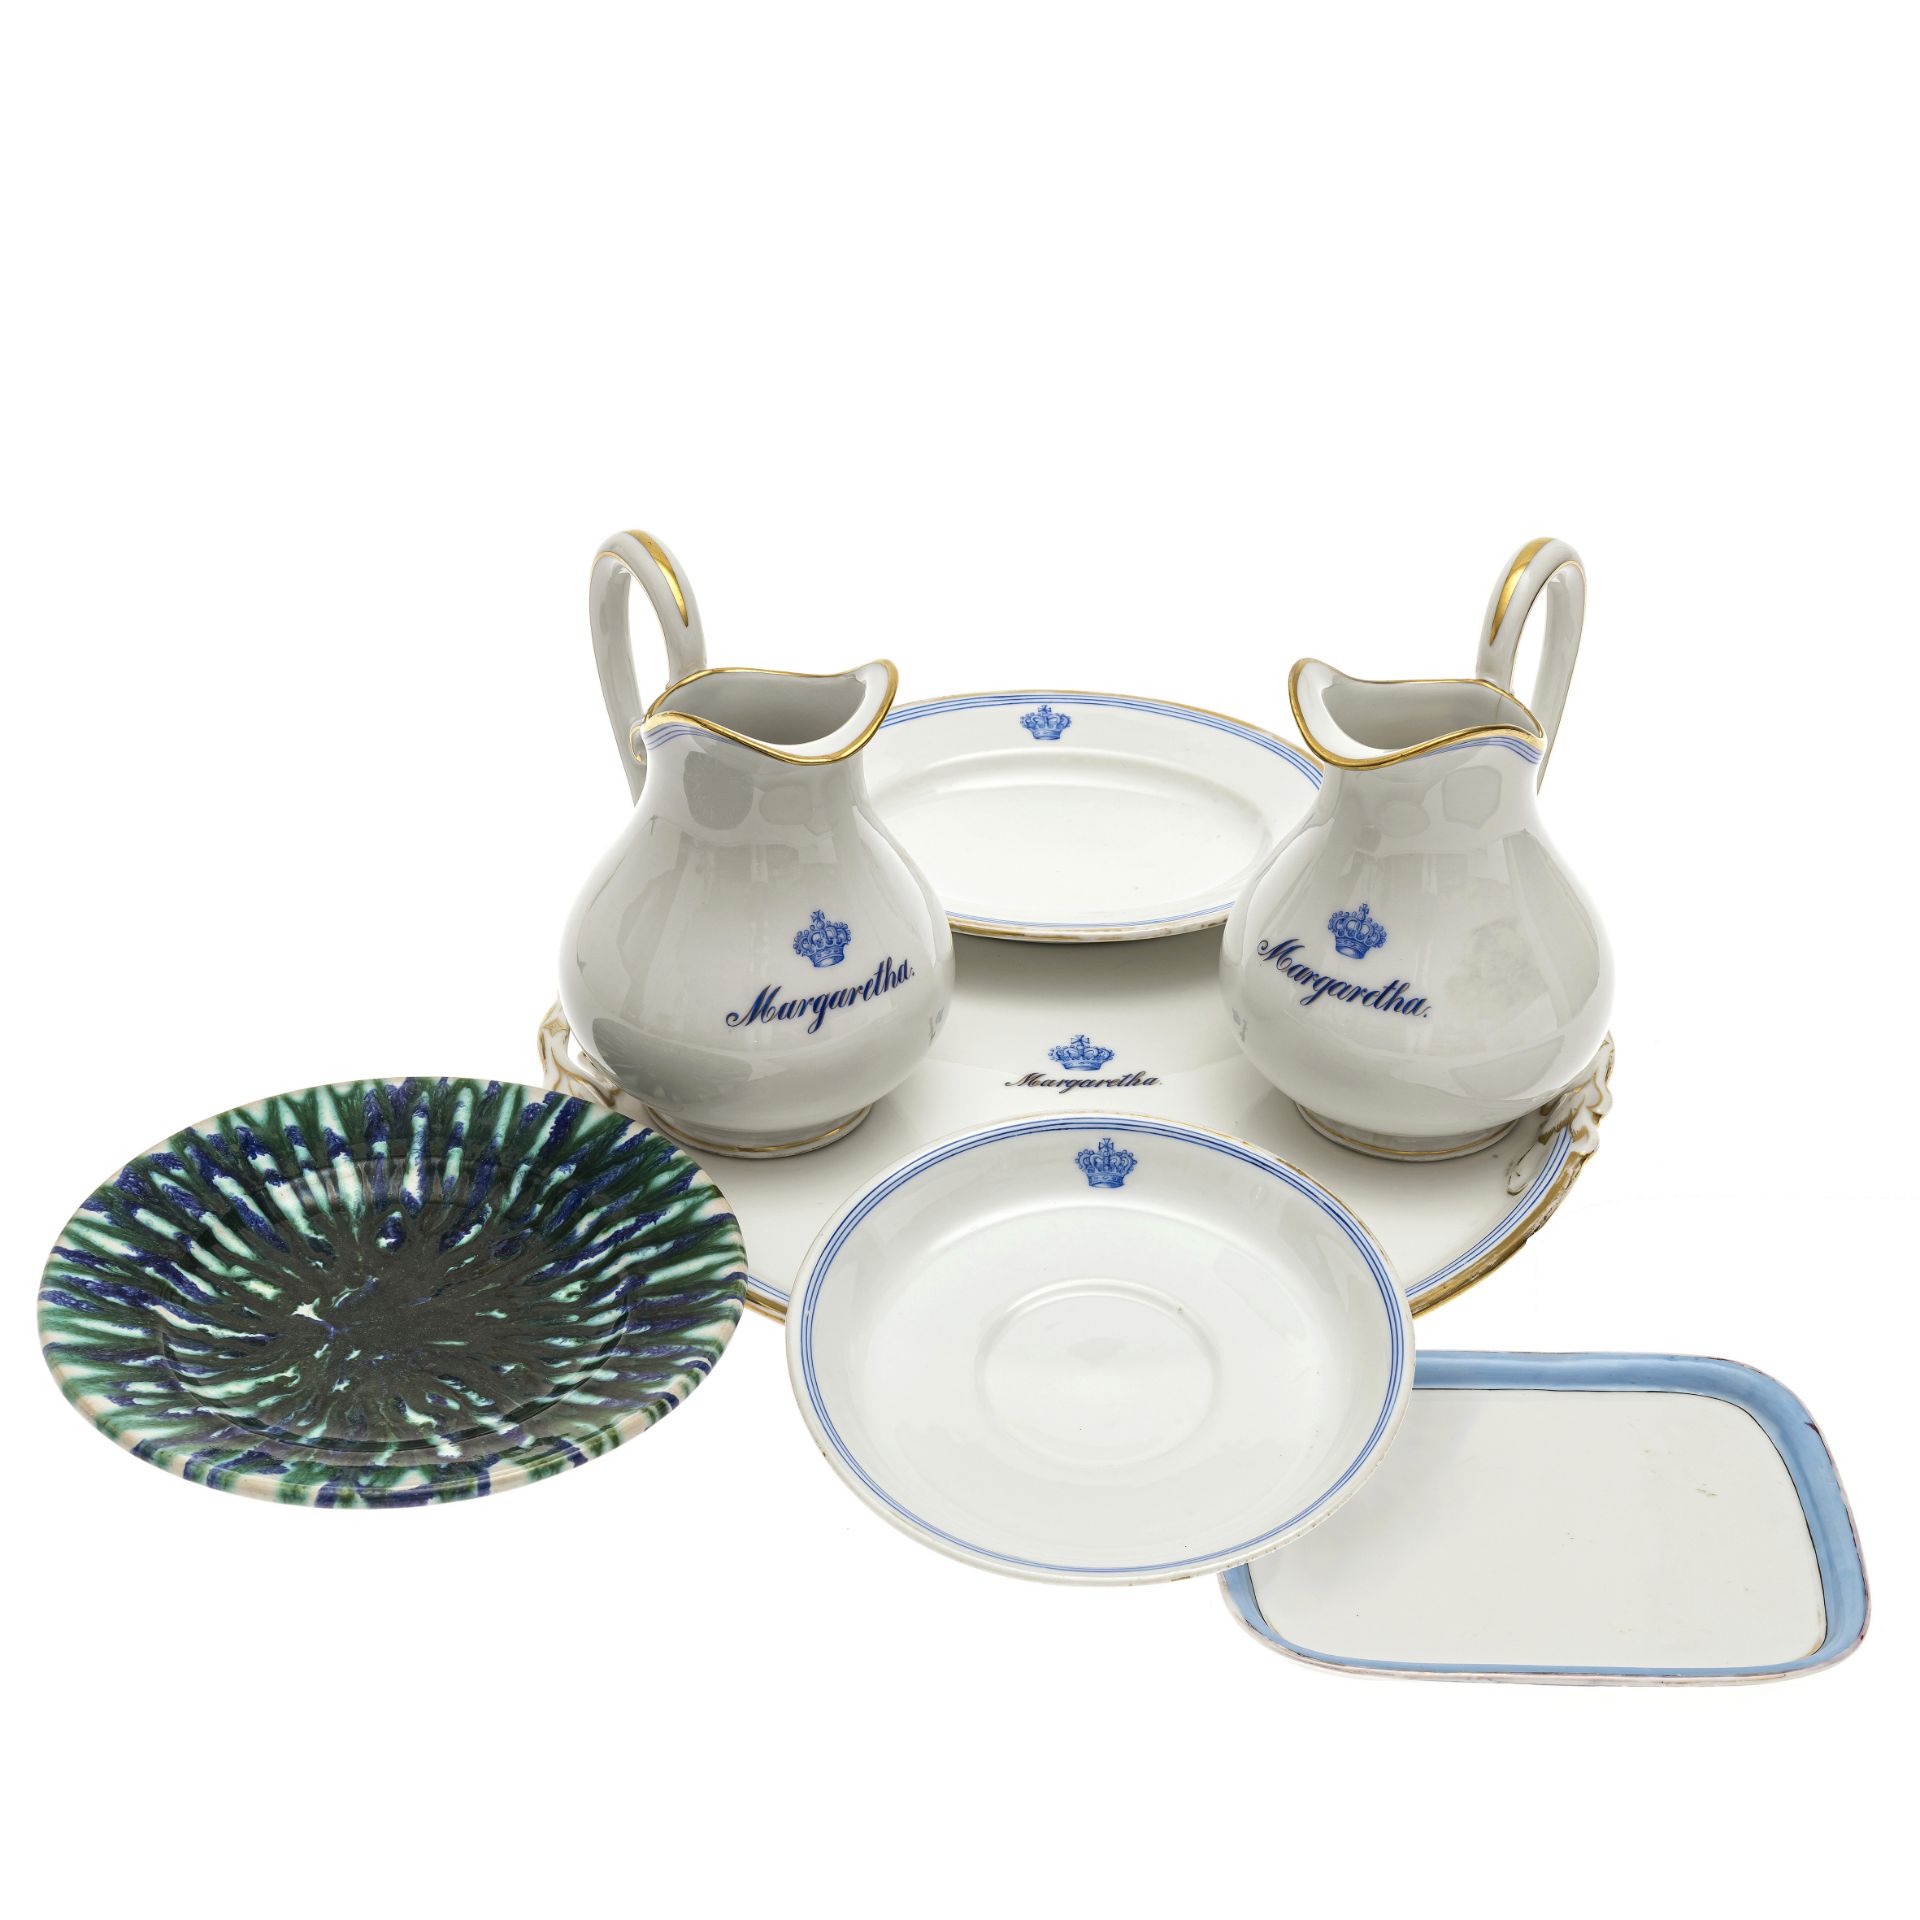 Two pots, cake stand, oval bowl and small tray